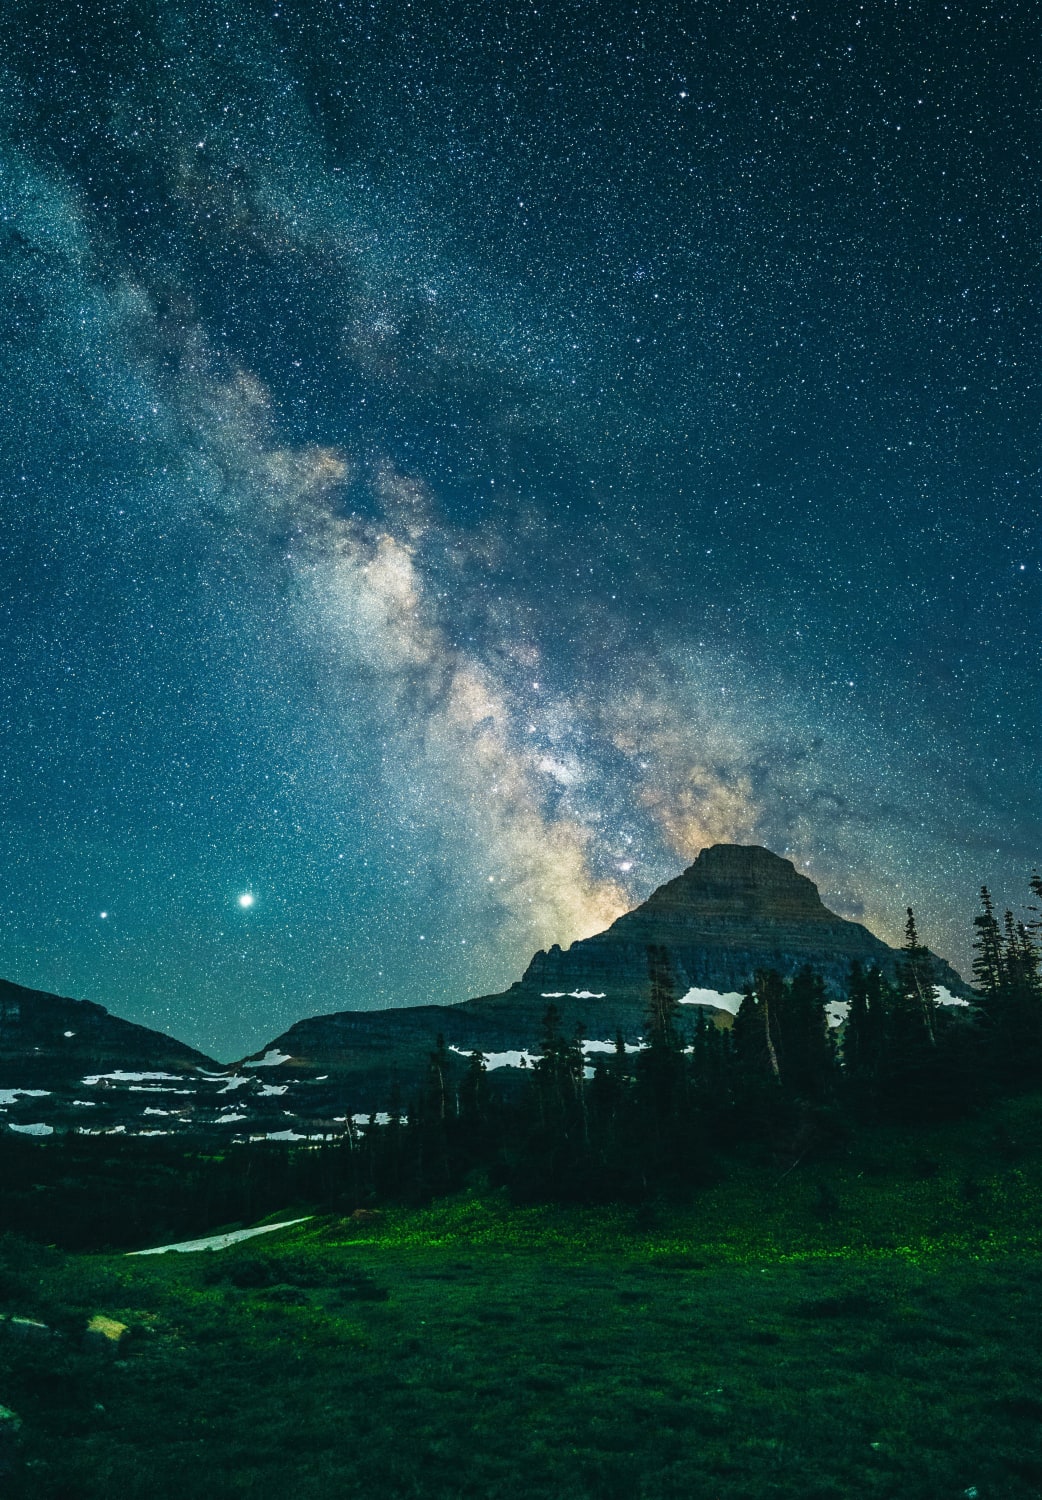 Milky Way as seen from Glacier National Park, Montana, USA.